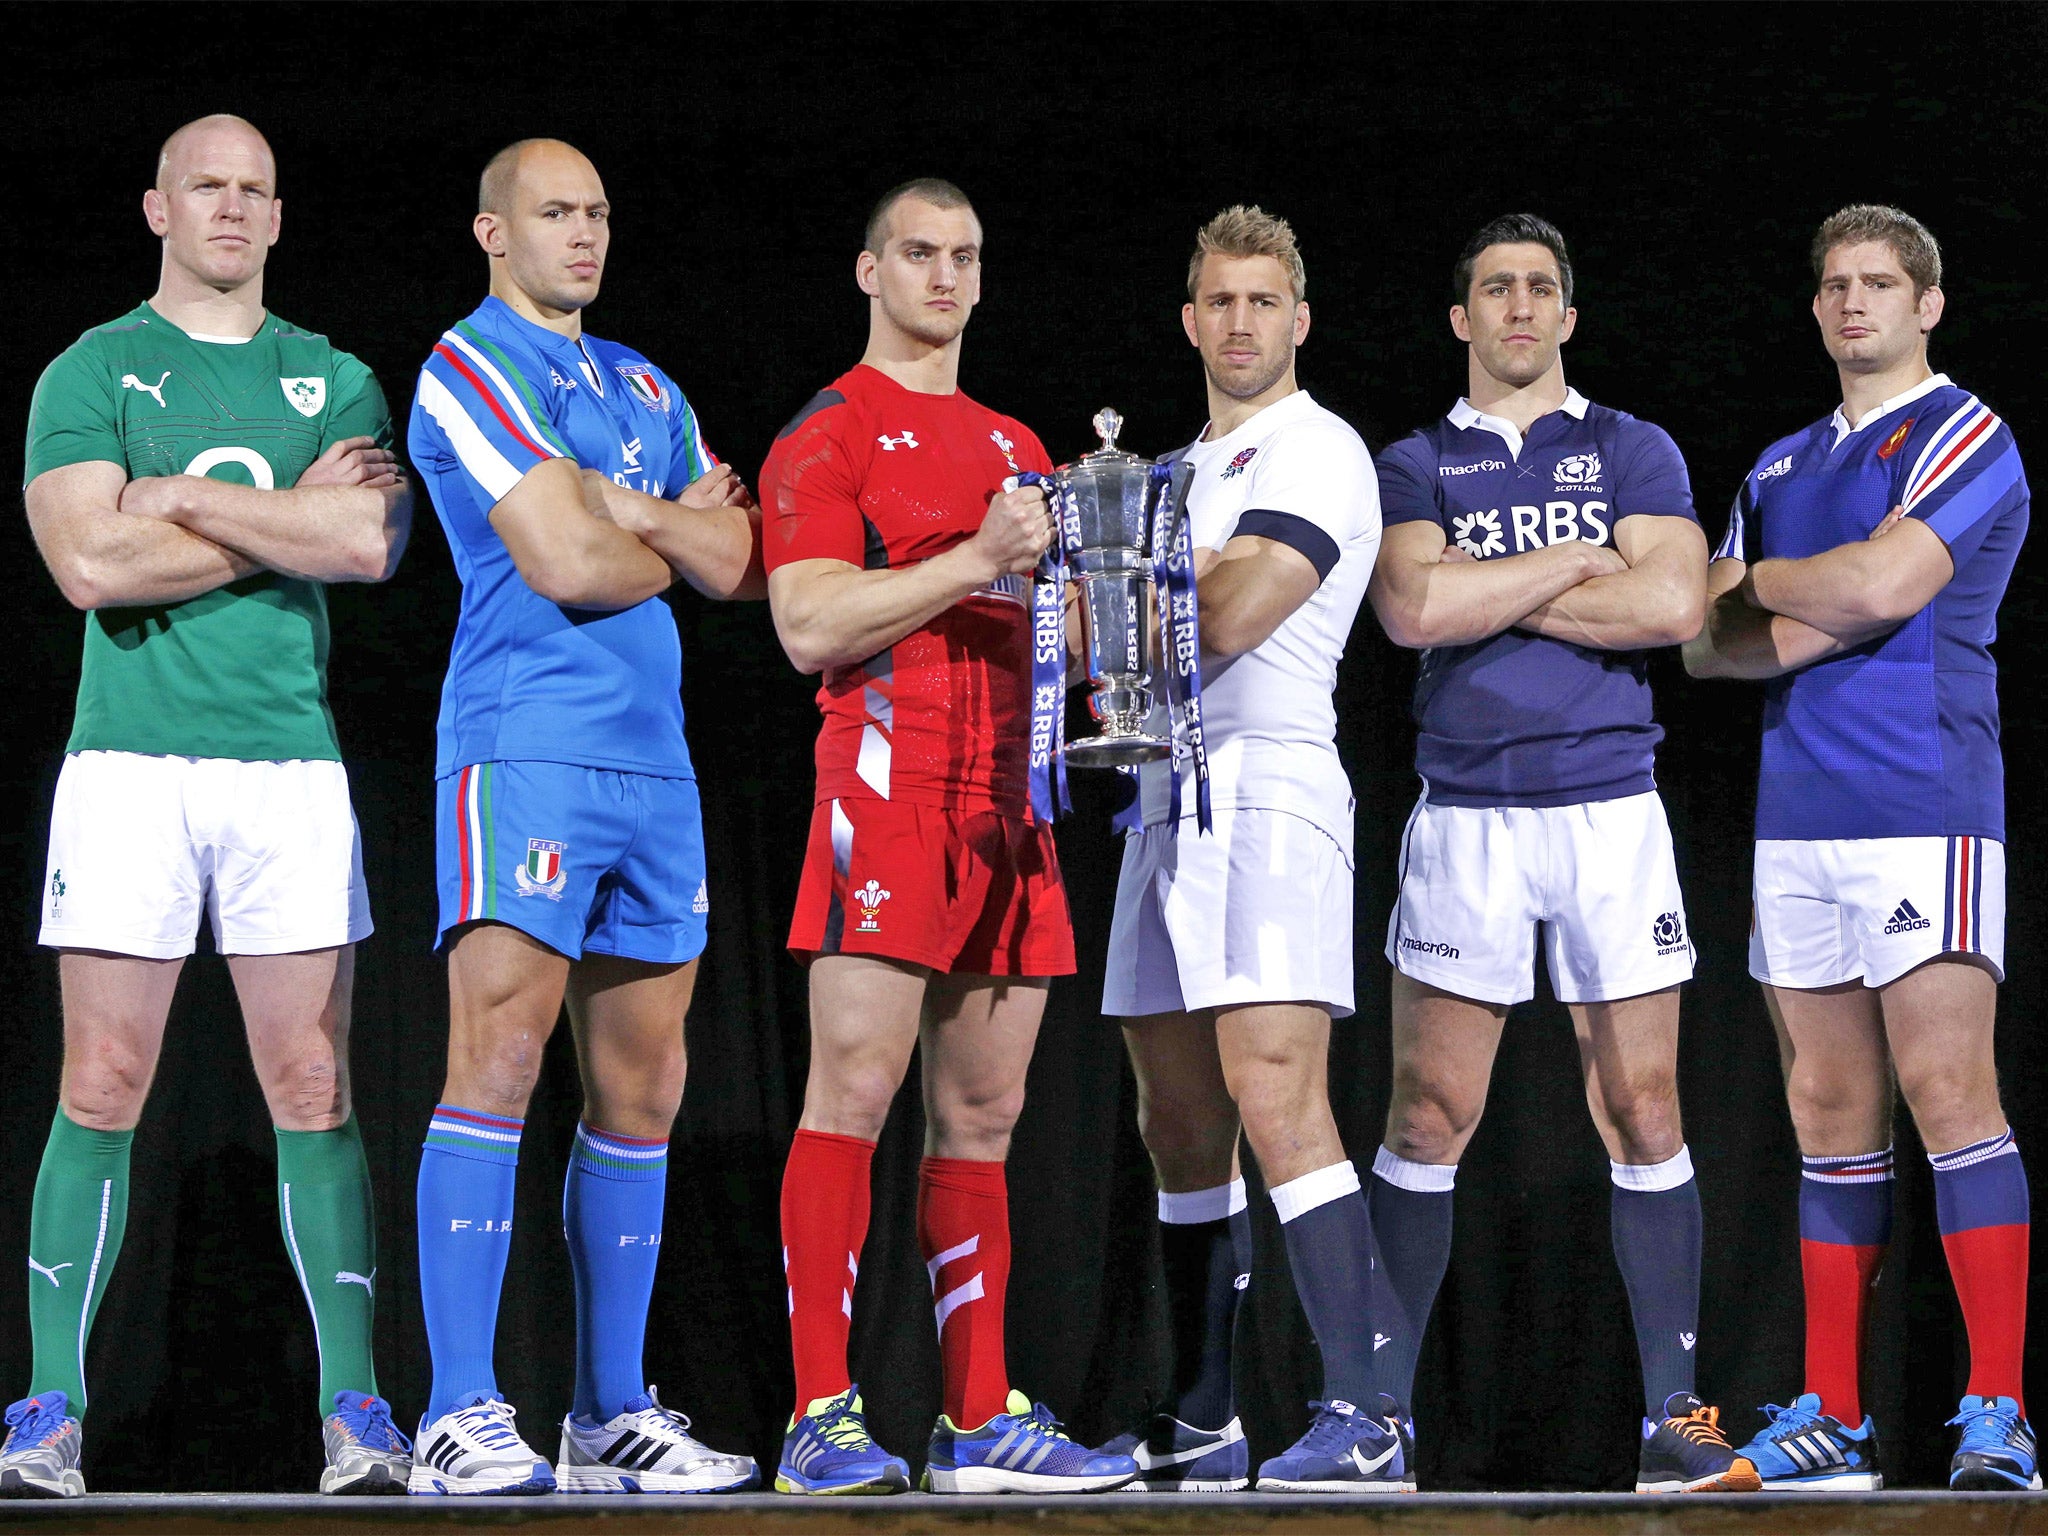 (Left to right) Ireland’s captain Paul O’Connell, Italy’s Sergio Parisse, Wales’s Sam Warburton, England’s Chris Robshaw, Scotland’s Kelly Brown and France’s Pascal Pape line up for the launch of the Six Nations